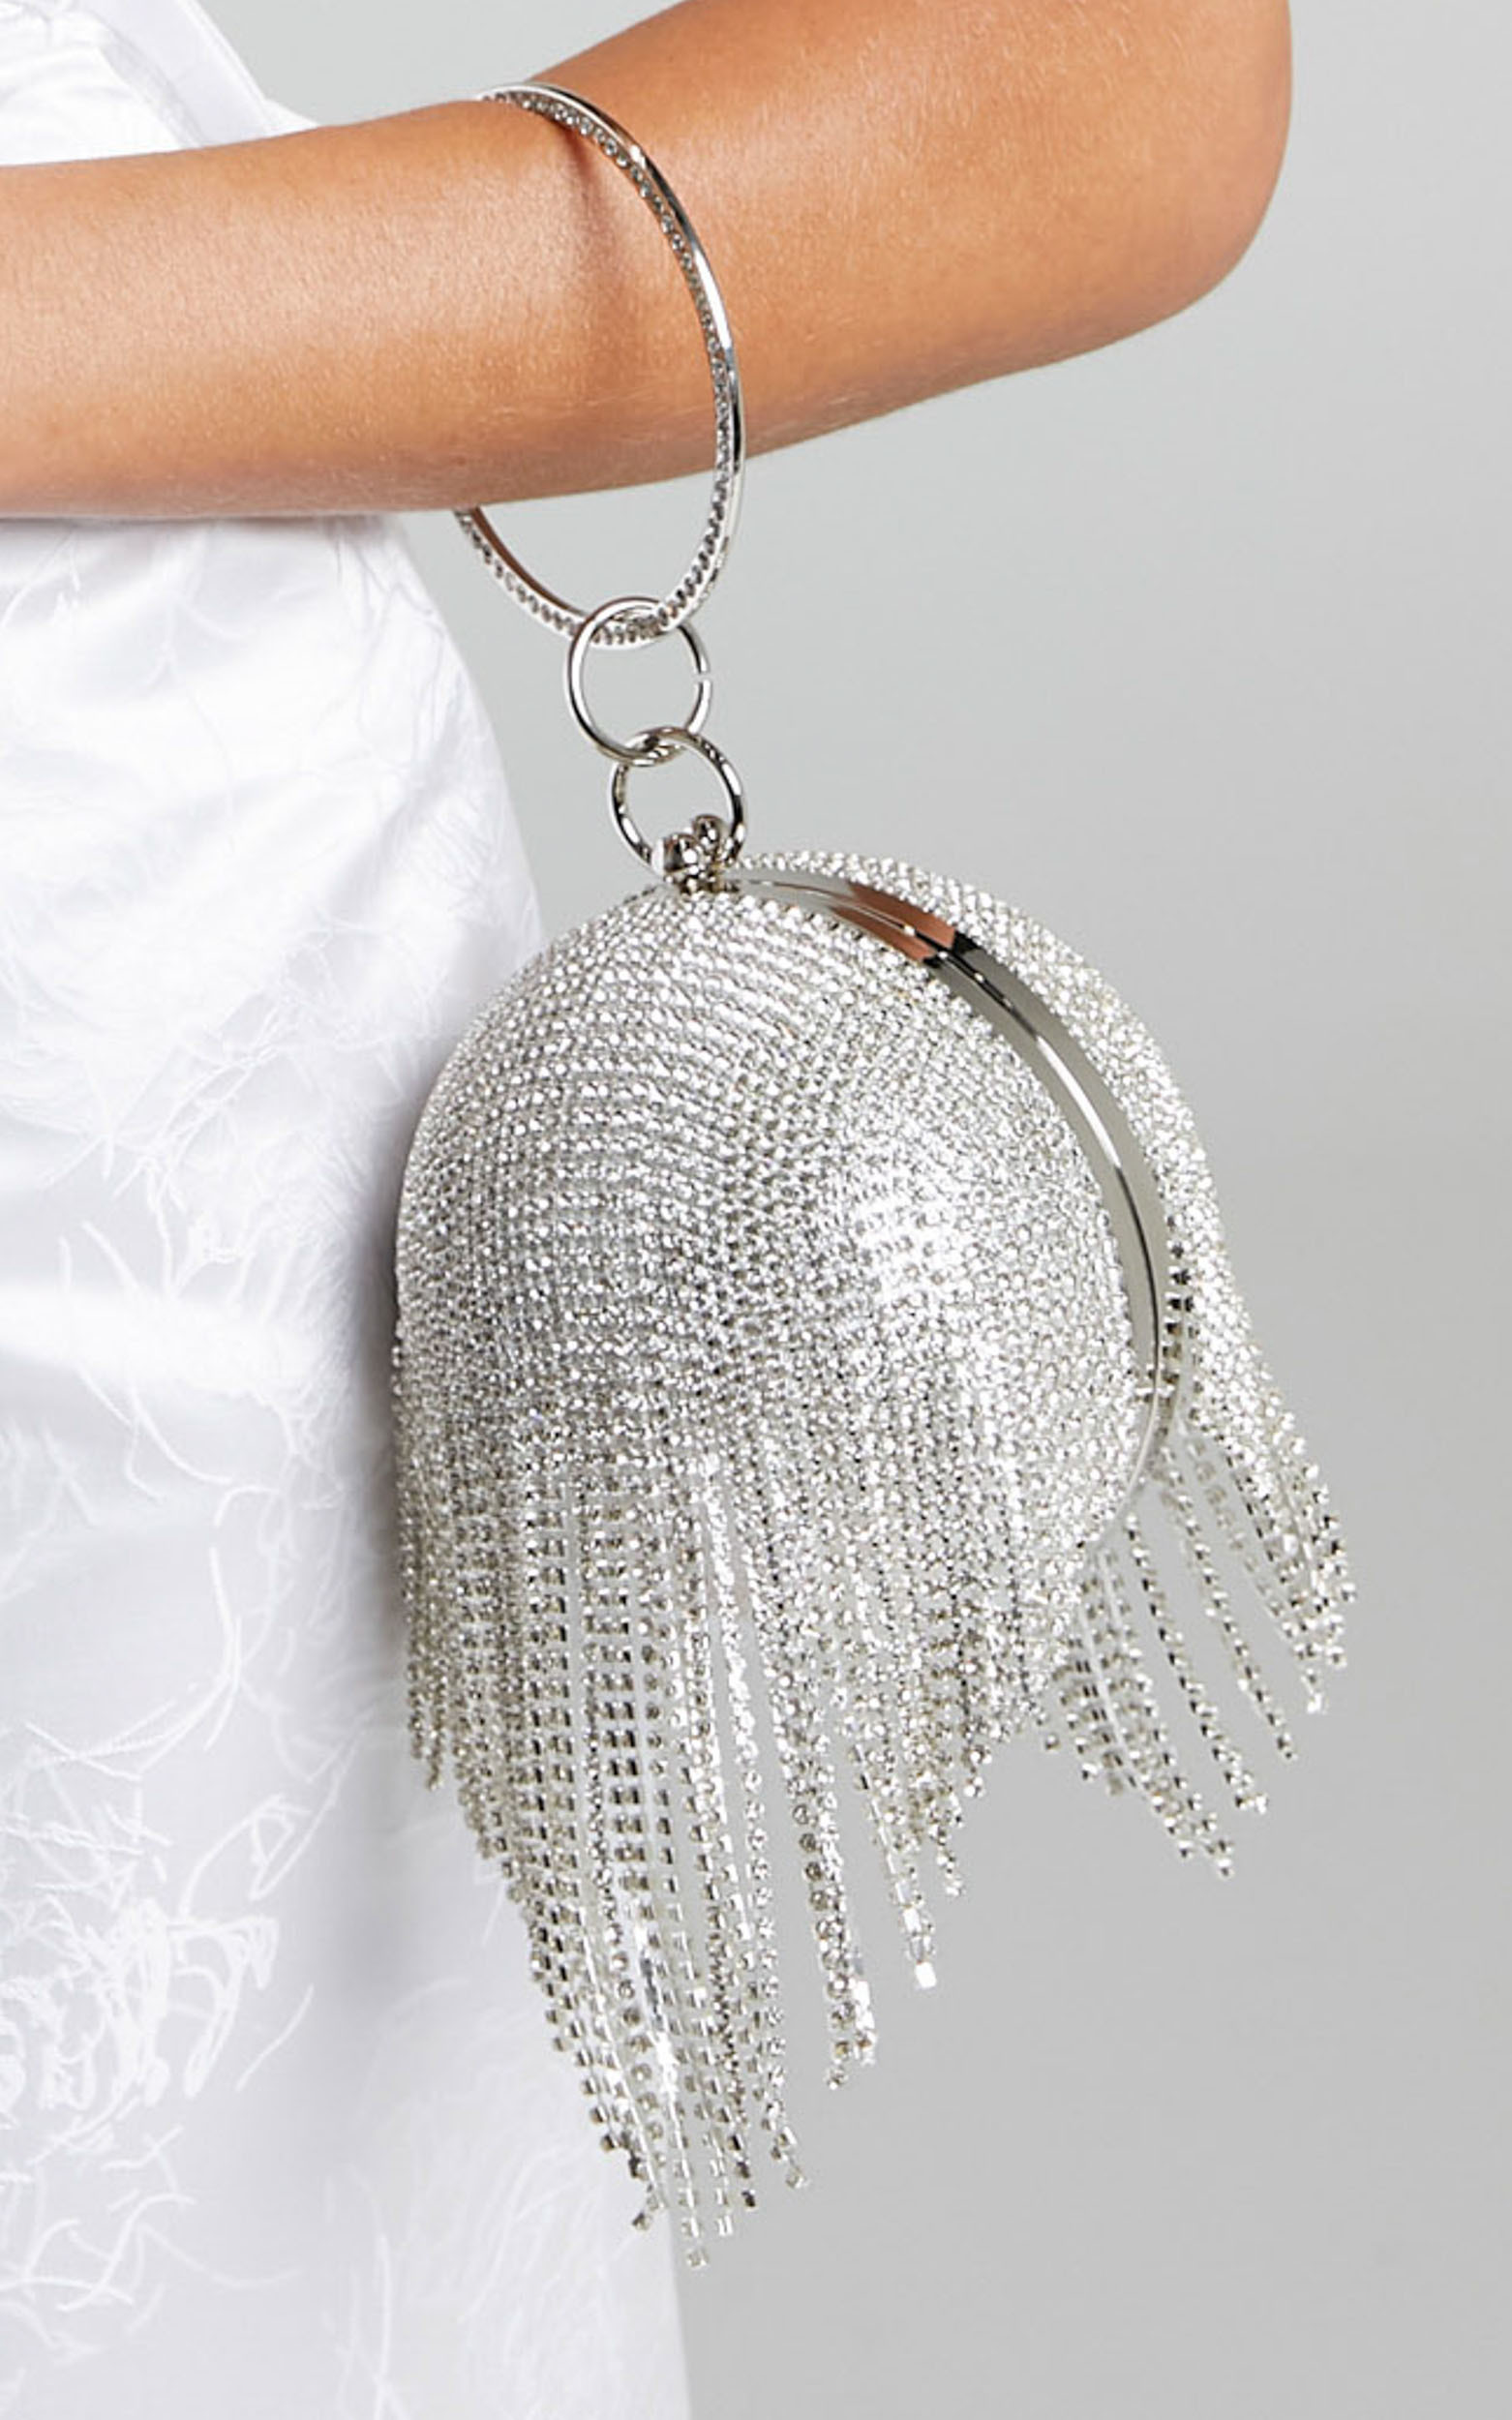 Downeti Diamante Sphere Clutch Bag in Silver - OneSize, SLV1, hi-res image number null